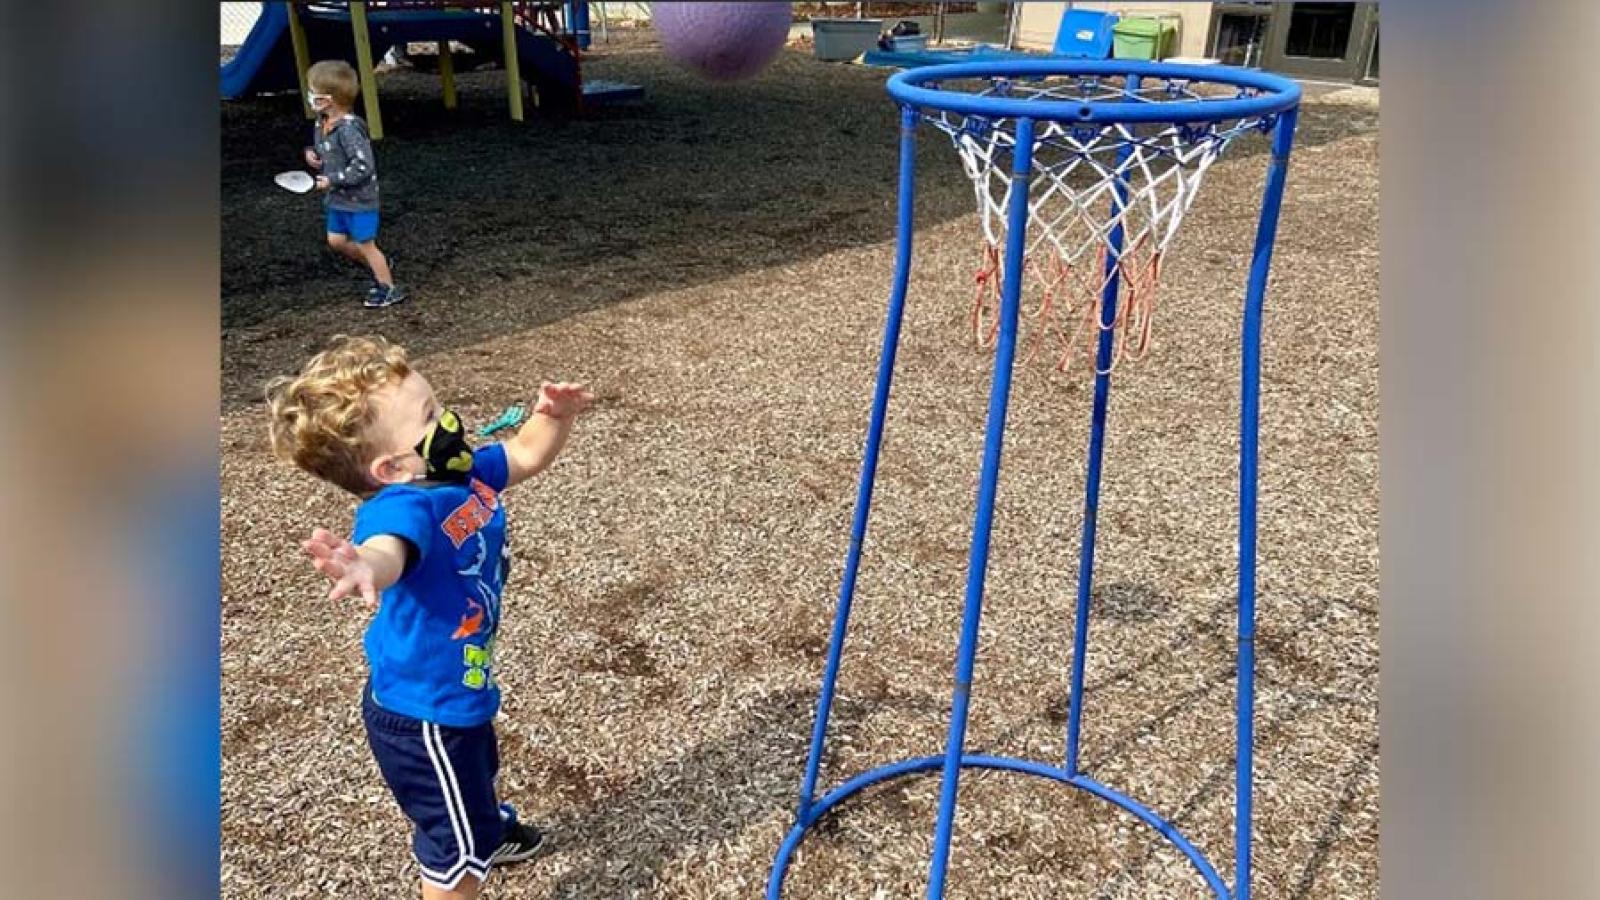 A child shoots a basketball into a small hoop.